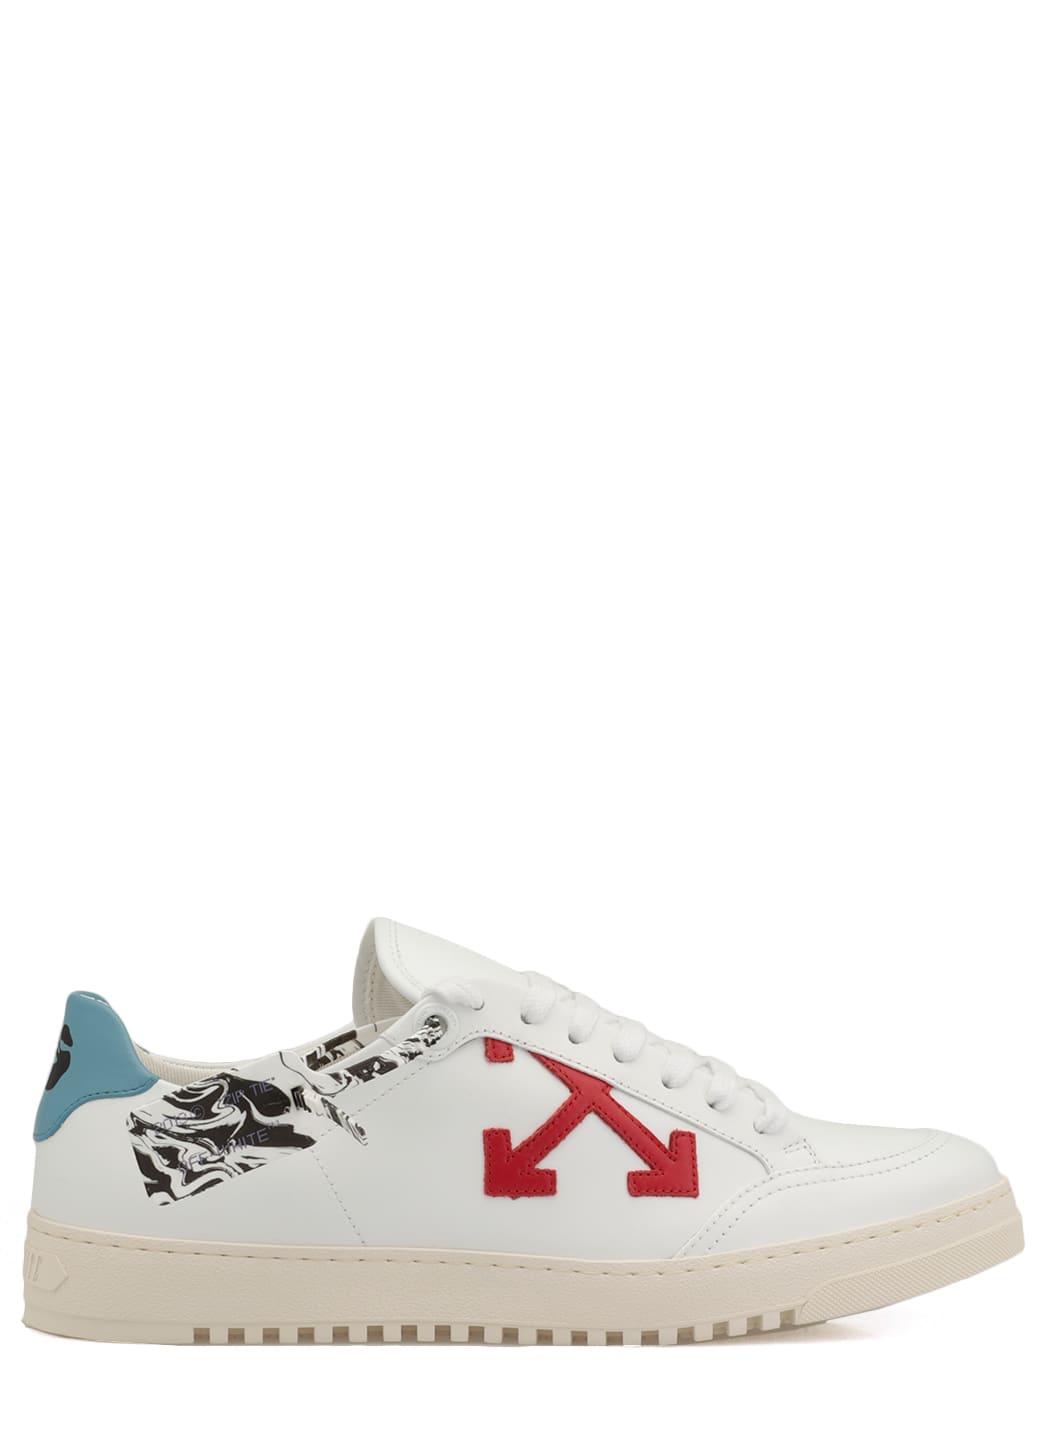 Off-White Leather Sneaker 2.0